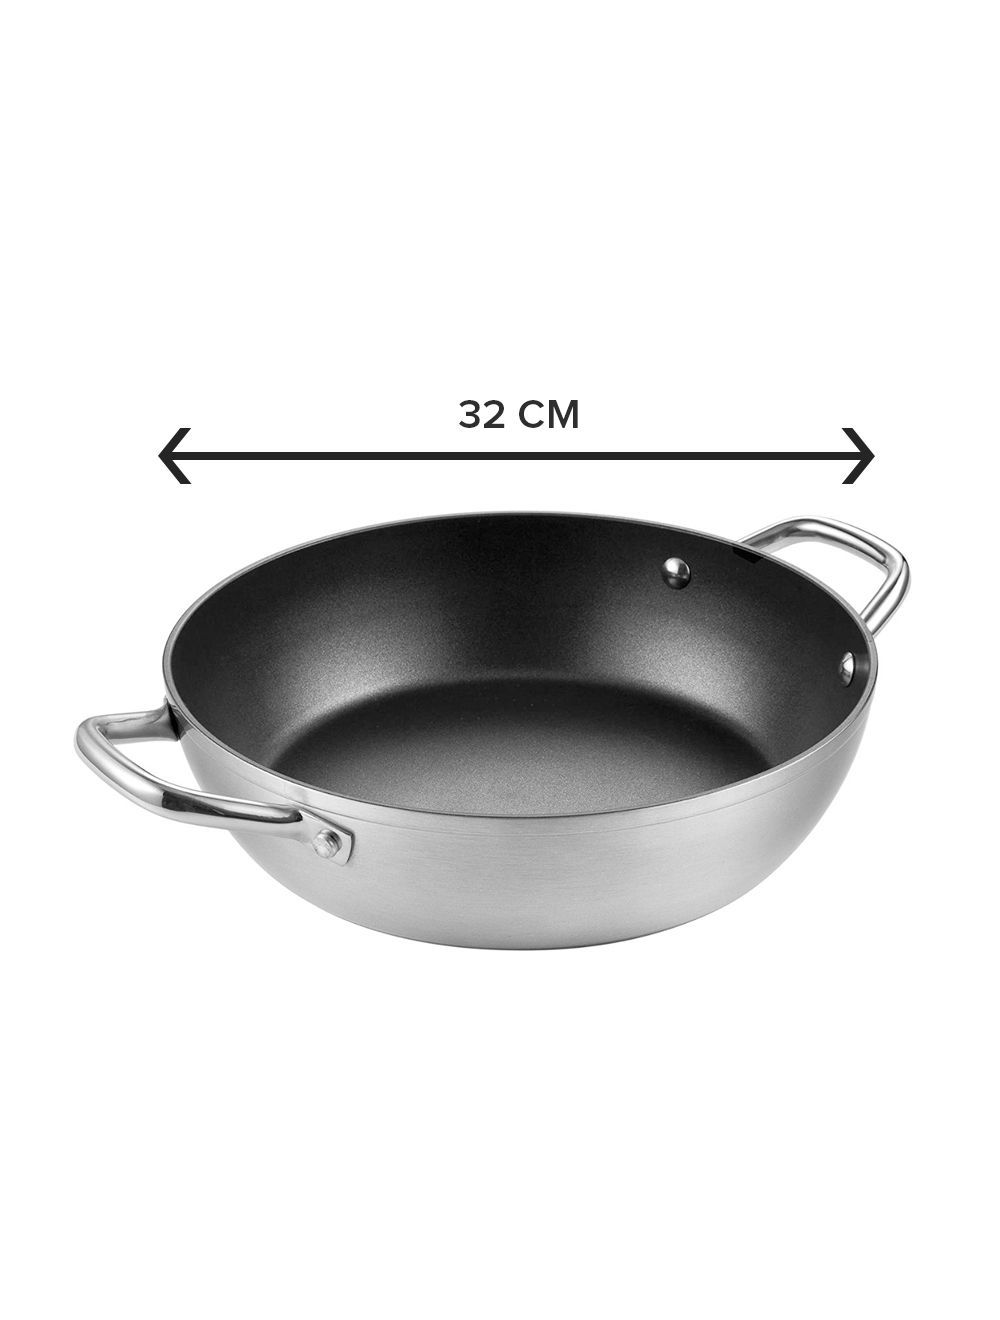 Grandchef Deep Frying Pan With Two Handles 32 cm